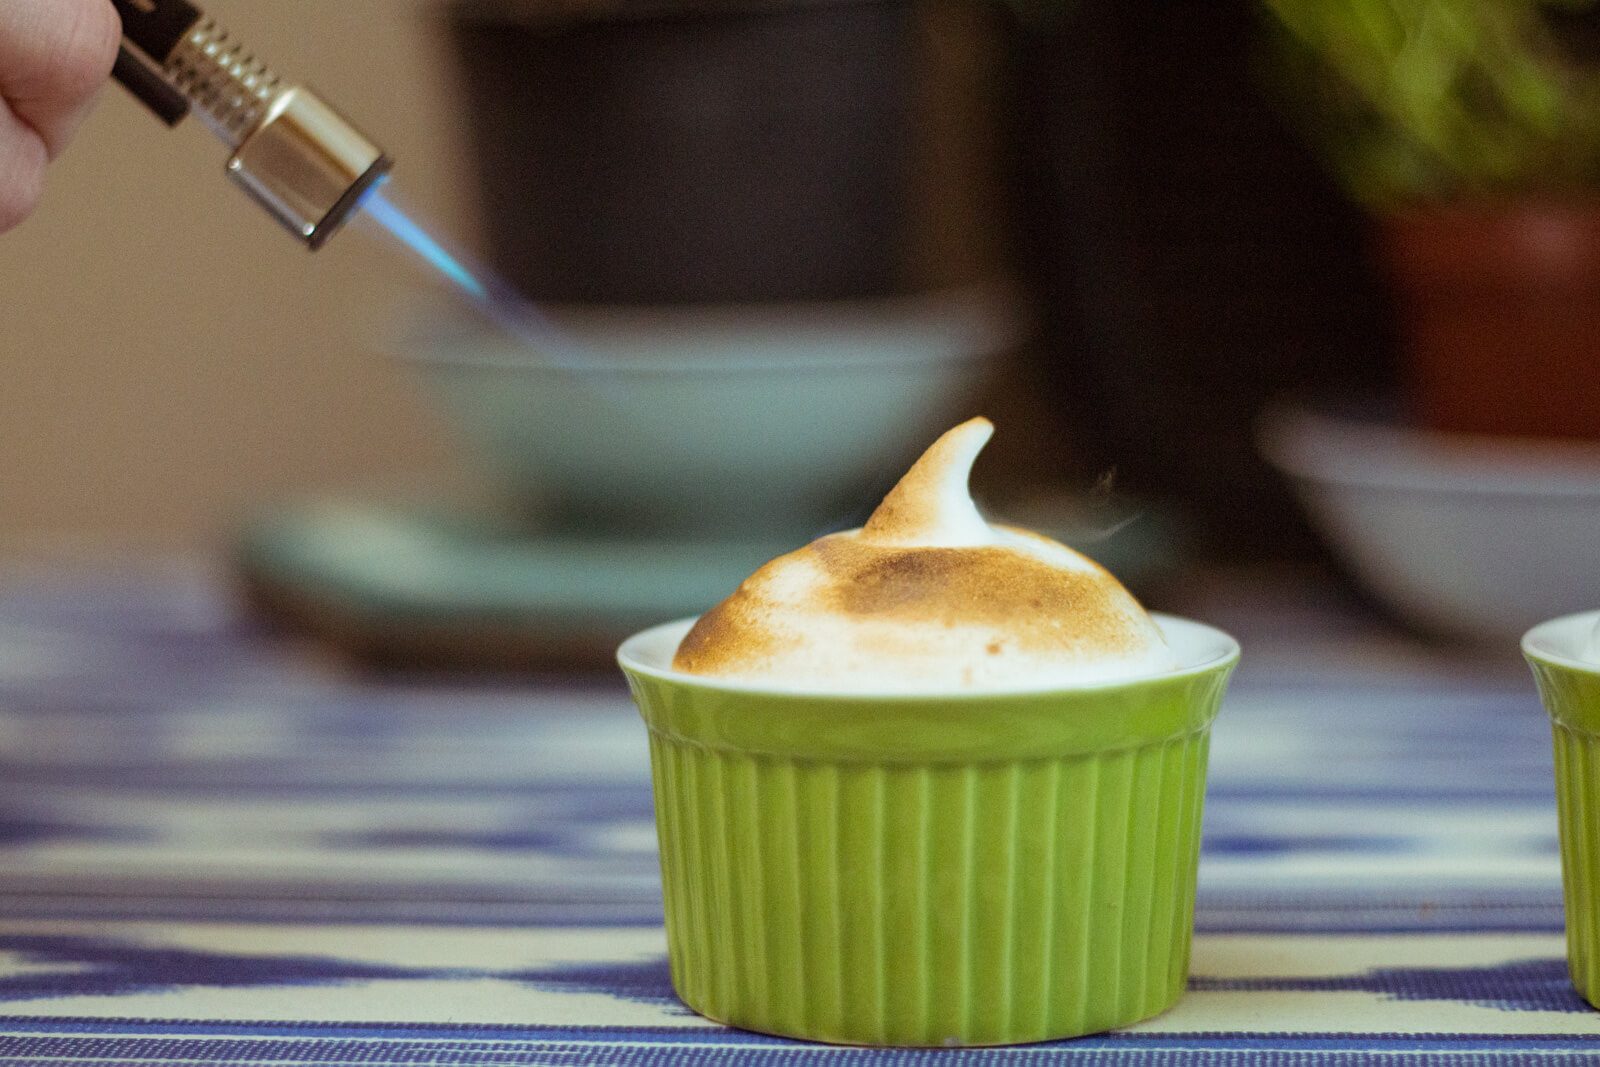 Brown marshmallows with a cooking torch.